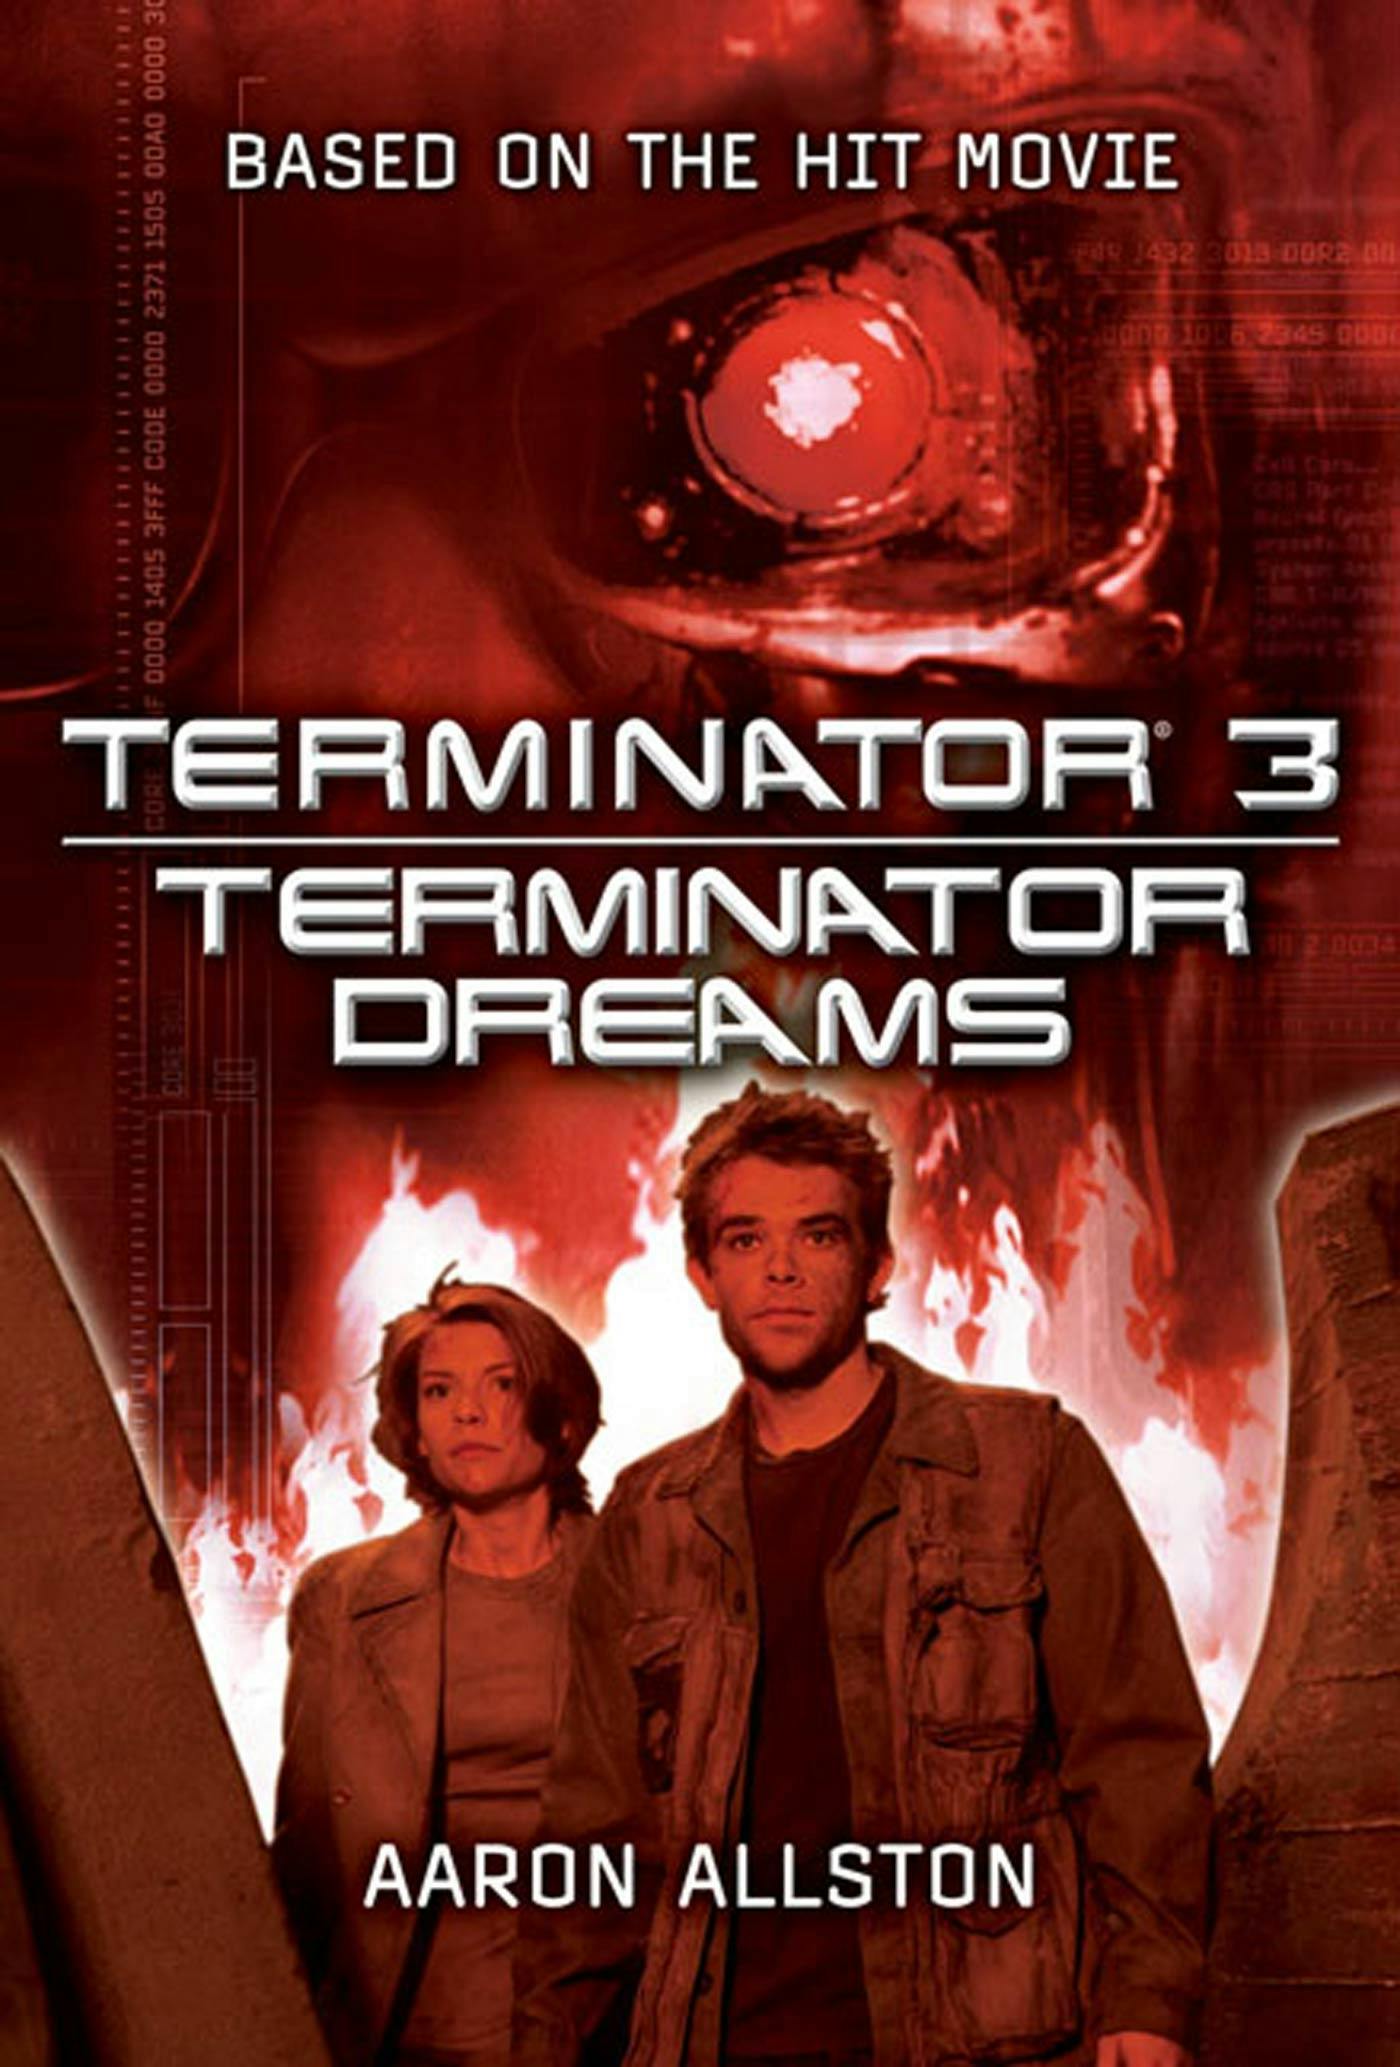 Cover for the book titled as: Terminator 3: Terminator Dreams